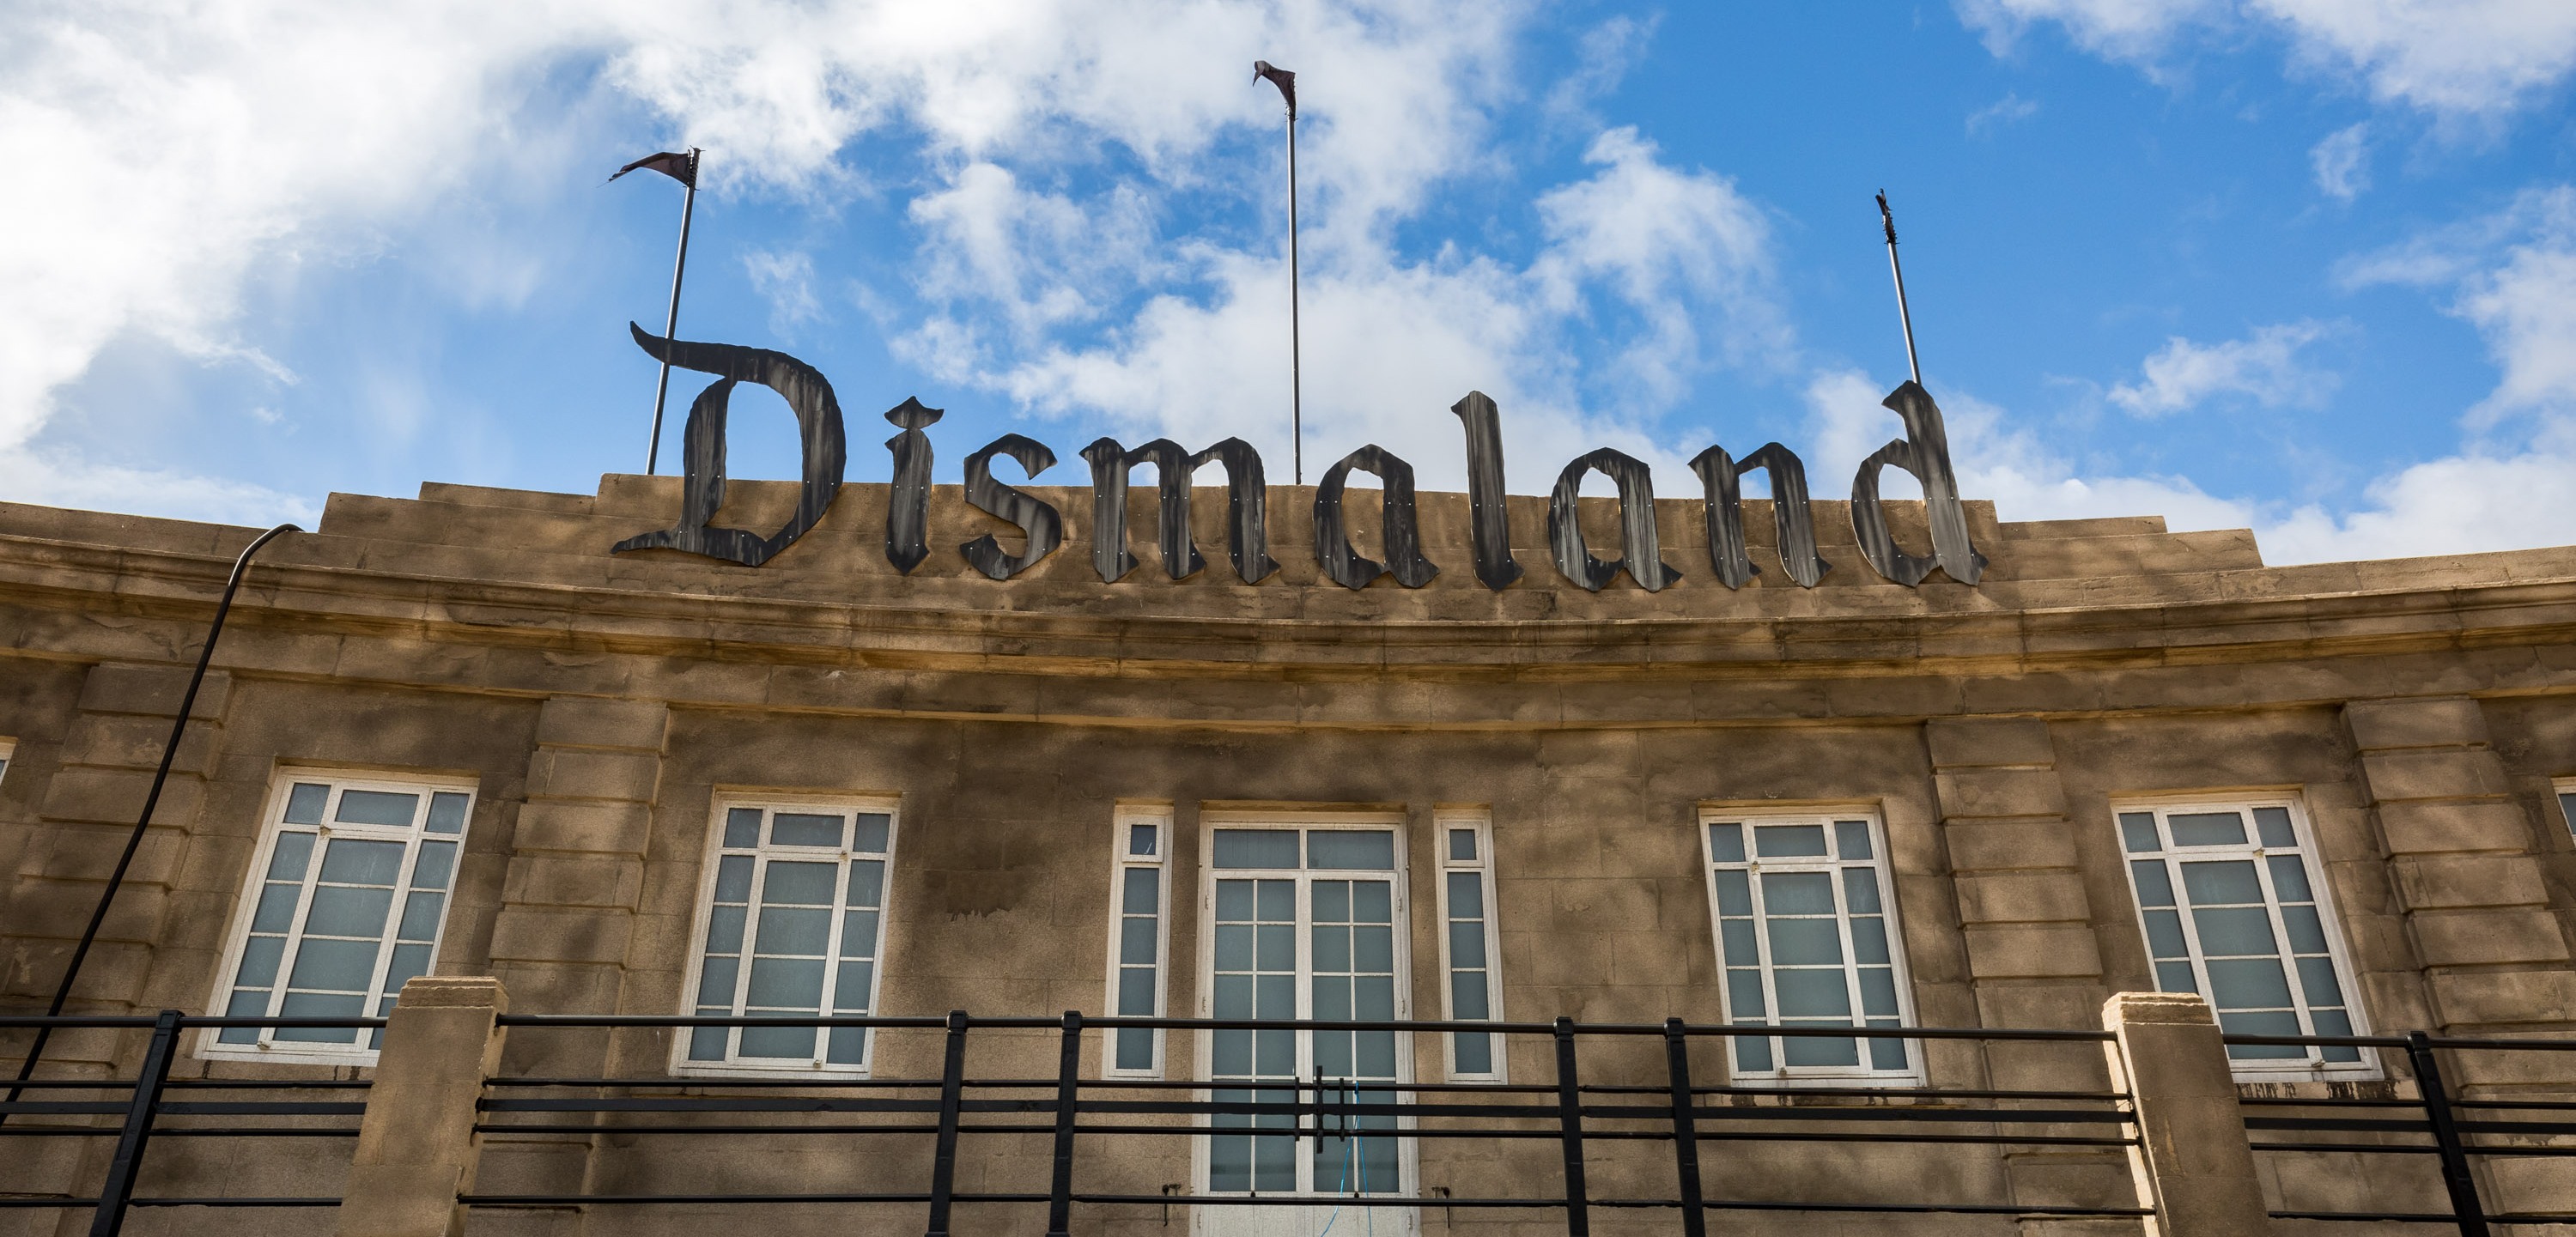 “Dismaland” was a temporary art installation organized by artist Banksy. A riff on Disneyland, the park was in Weston-super-Mare in Somerset, England. Photo by Guy Corbishley/Demotix/Corbis